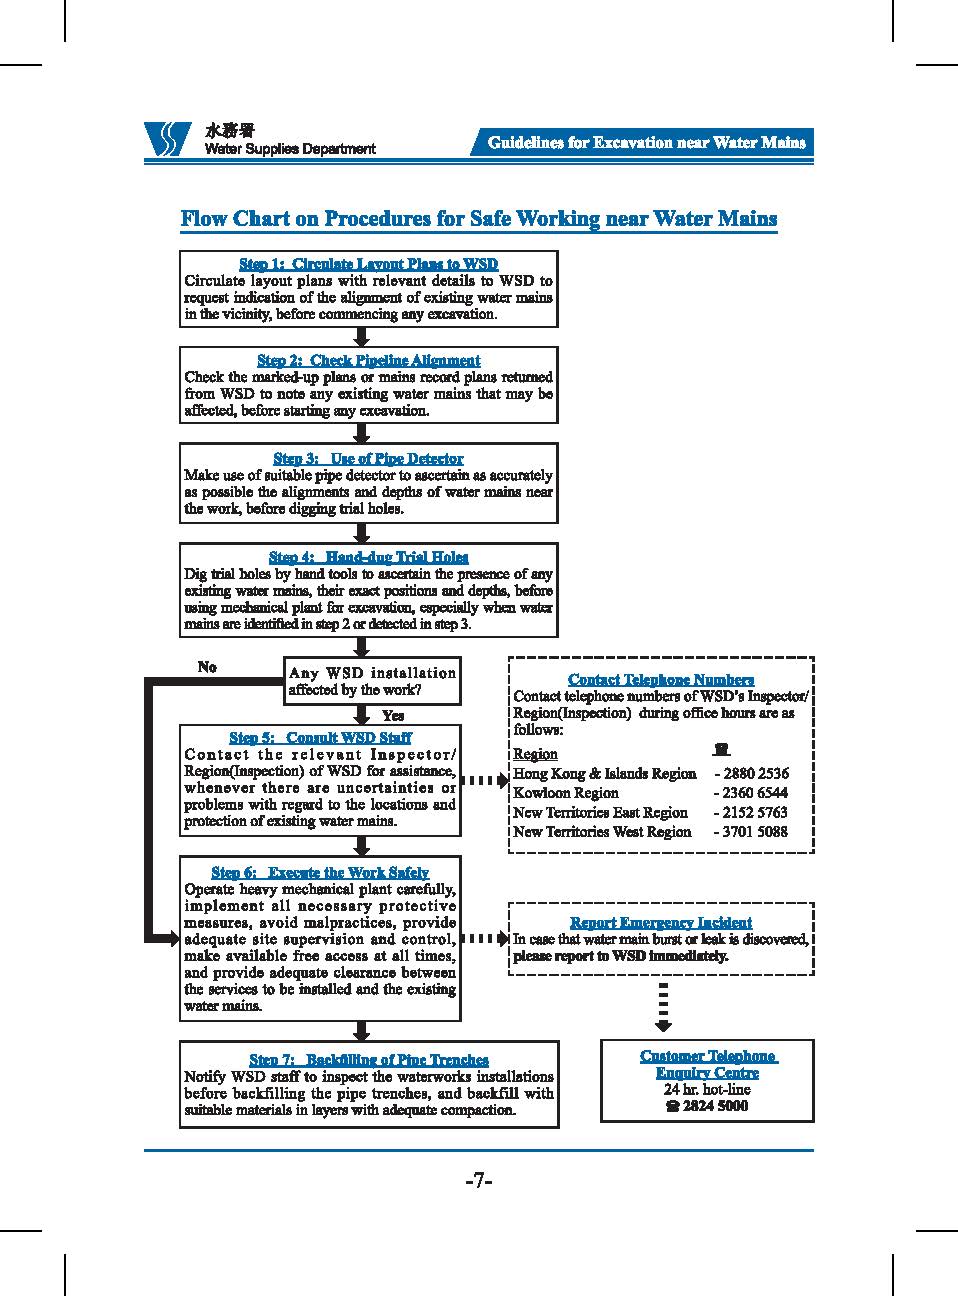 Flow Chart on Procedures for Safe Working near Water Mains